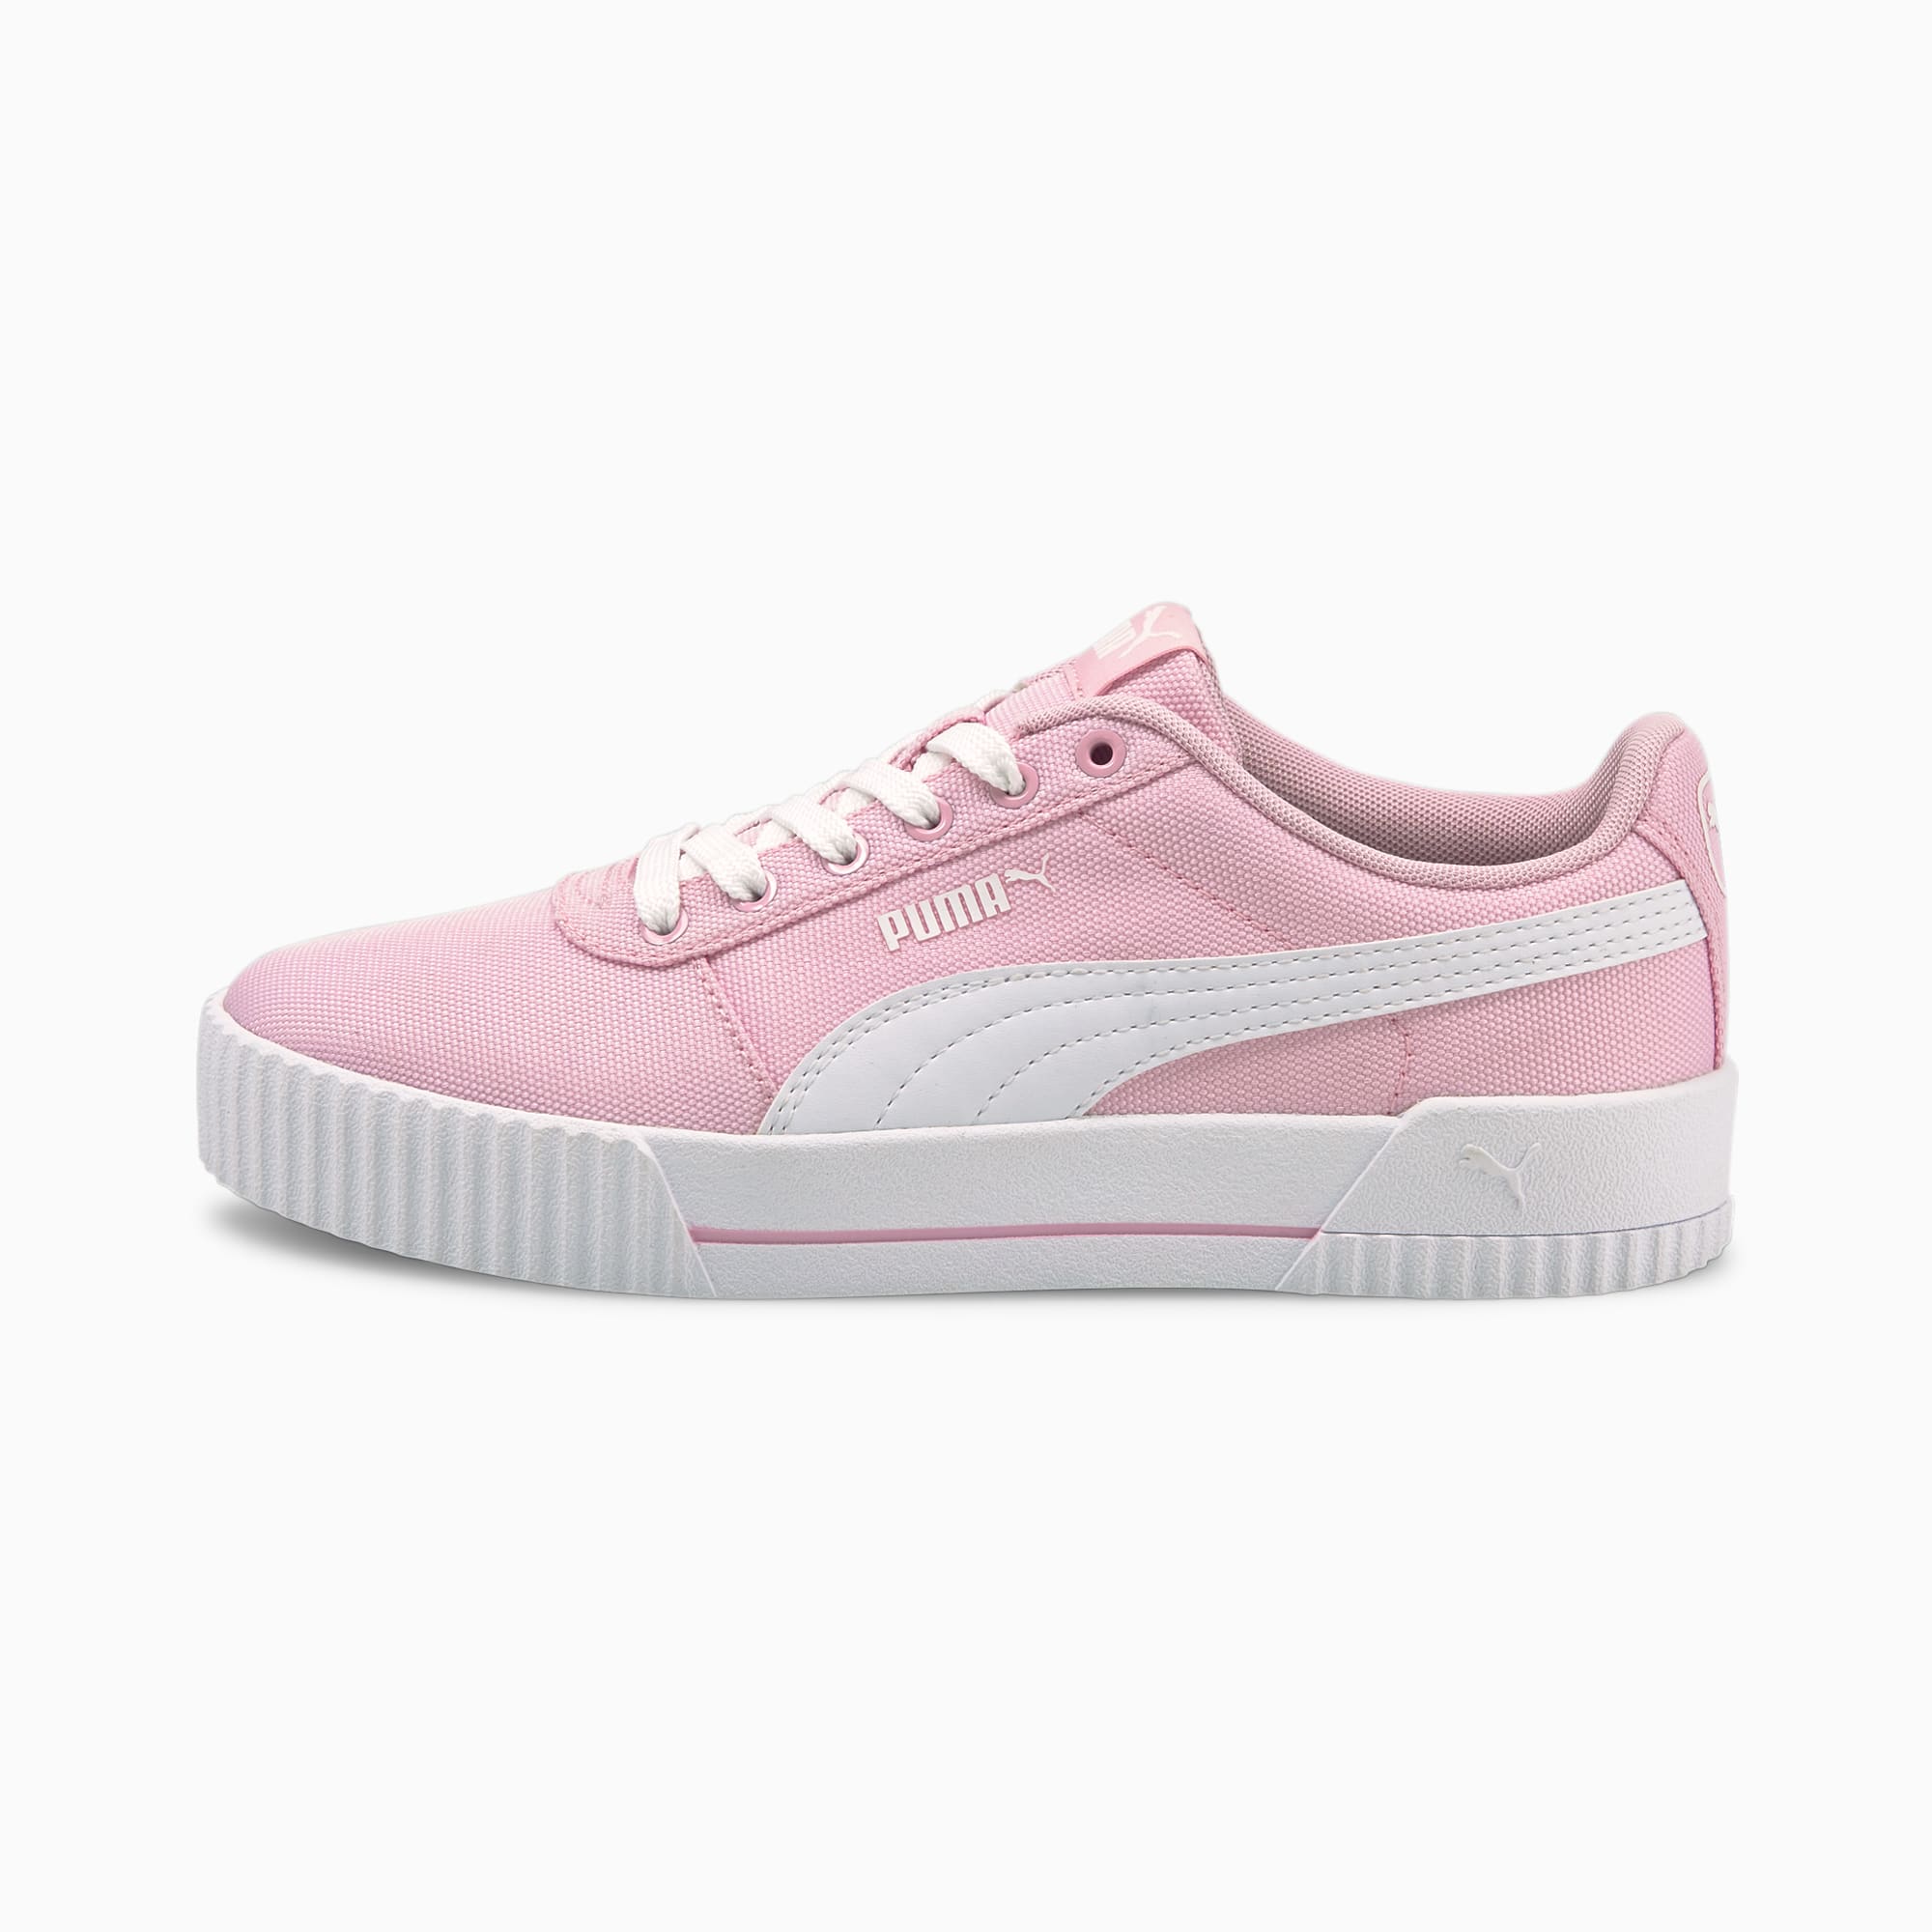 Carina canvas sneakers dames, Roze/Wit, Maat 38 | PUMA